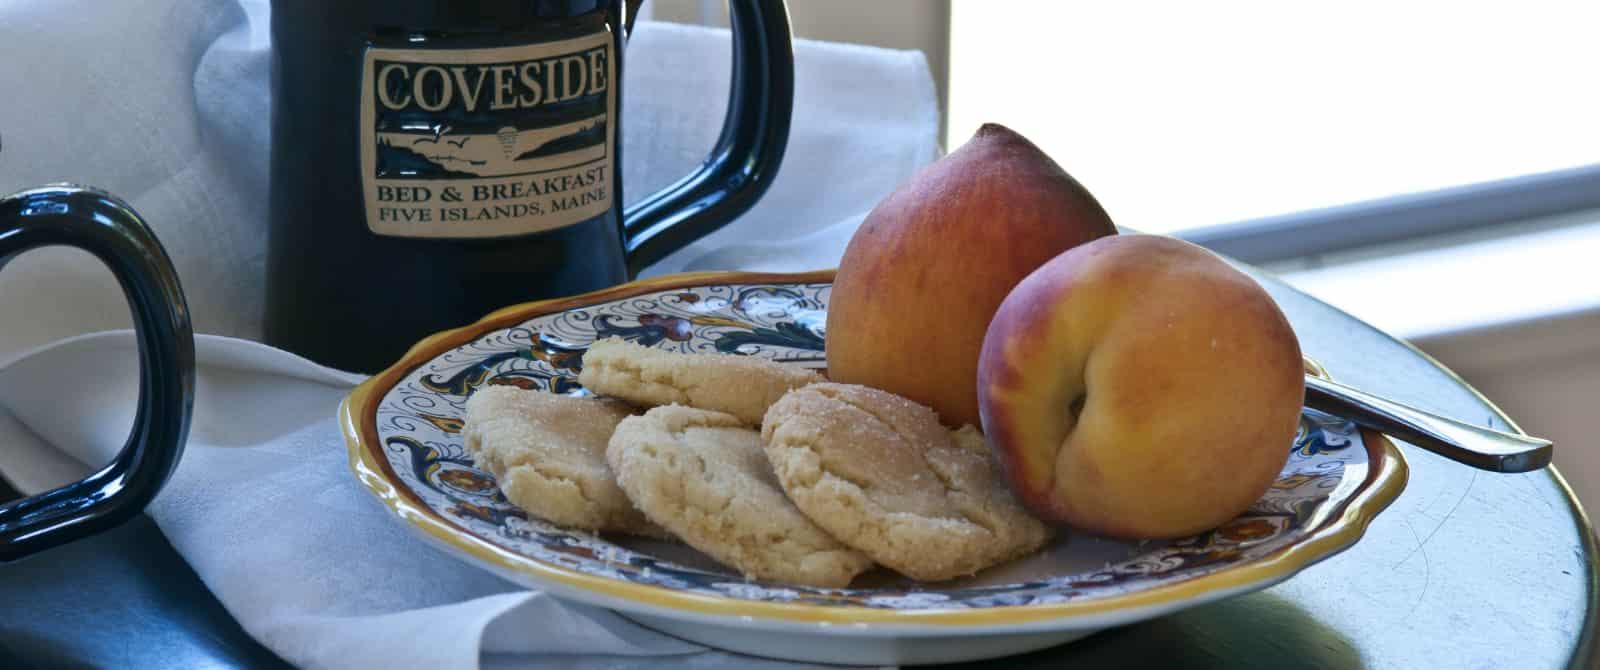 Two ripe peaches and sugar cookies on a plate next to a green coffee mug with the Coveside Bed & Breakfast logo.